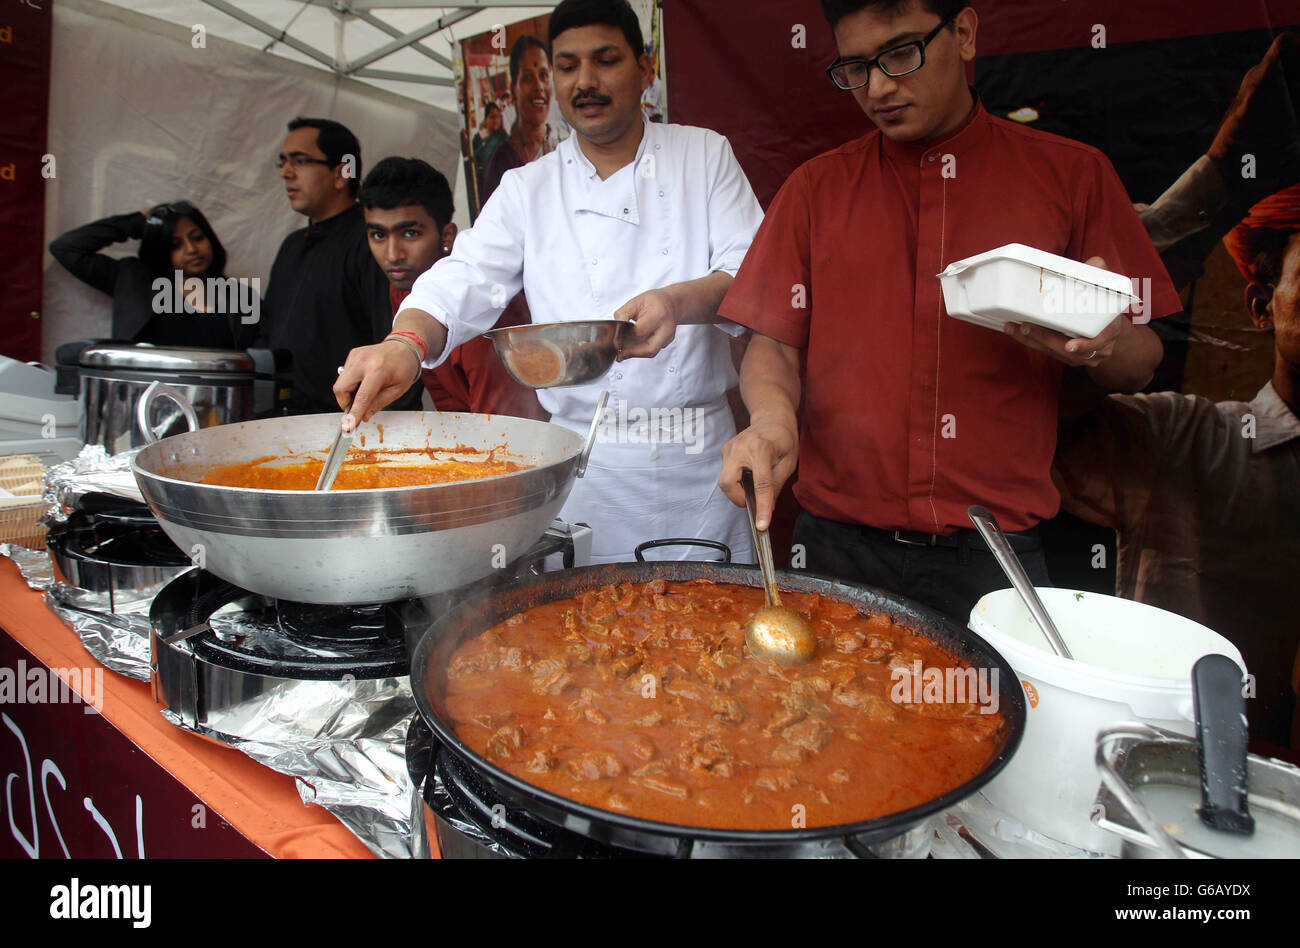 Food stalls in Trafalgar Square in London to celebrate Eid-ul-Fitr, meaning Feast of Breaking the Fast and signals the end of Ramadan, the holy month of fasting. Stock Photo